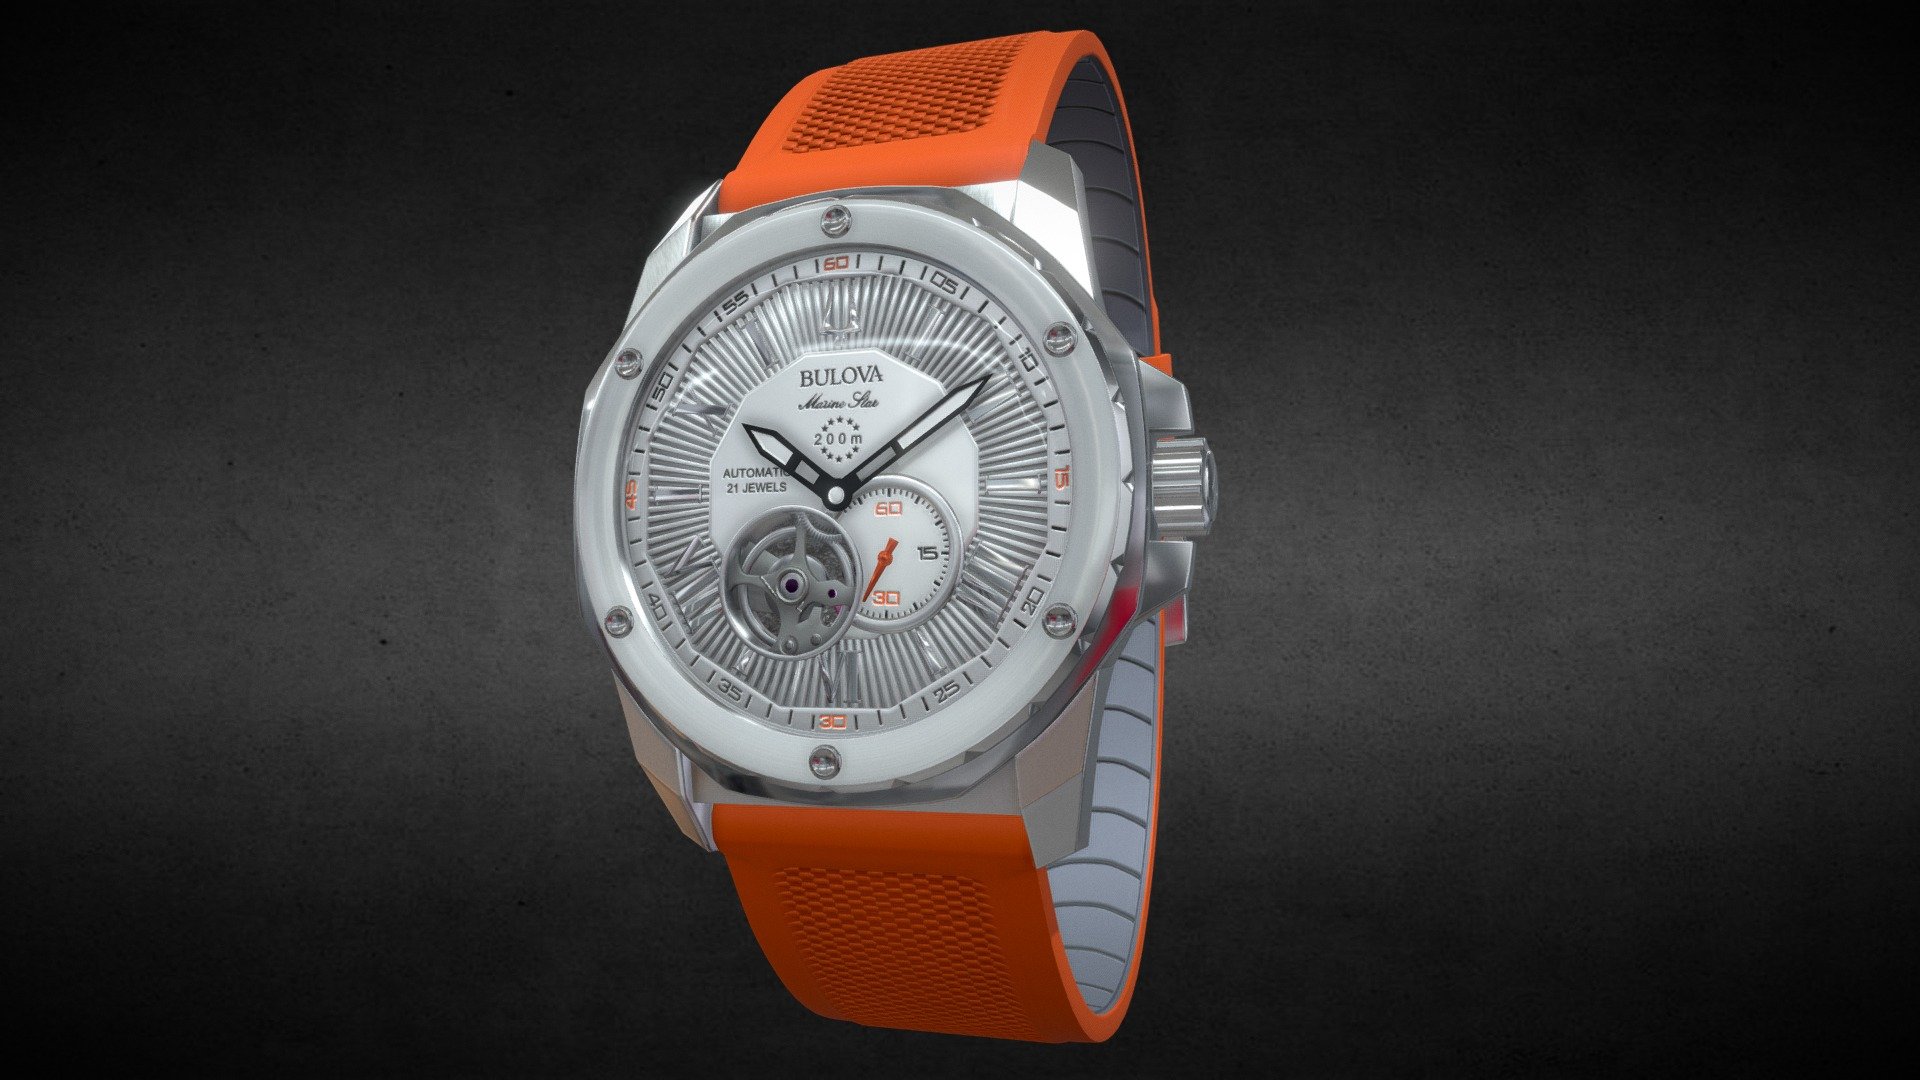 Awesome stainless steel Mens Automatic Marine Star Orange Silicone Strap watch 45mm․
Use for Unreal Engine 4 and Unity3D. Try in augmented reality in the AR-Watches app. 
Links to the app: Android, iOS

Currently available for download in FBX format.

3D model developed by AR-Watches

Disclaimer: We do not own the design of the watch, we only made the 3D model - Bulova Marine Star Orange Watch - Buy Royalty Free 3D model by ar-watches 3d model